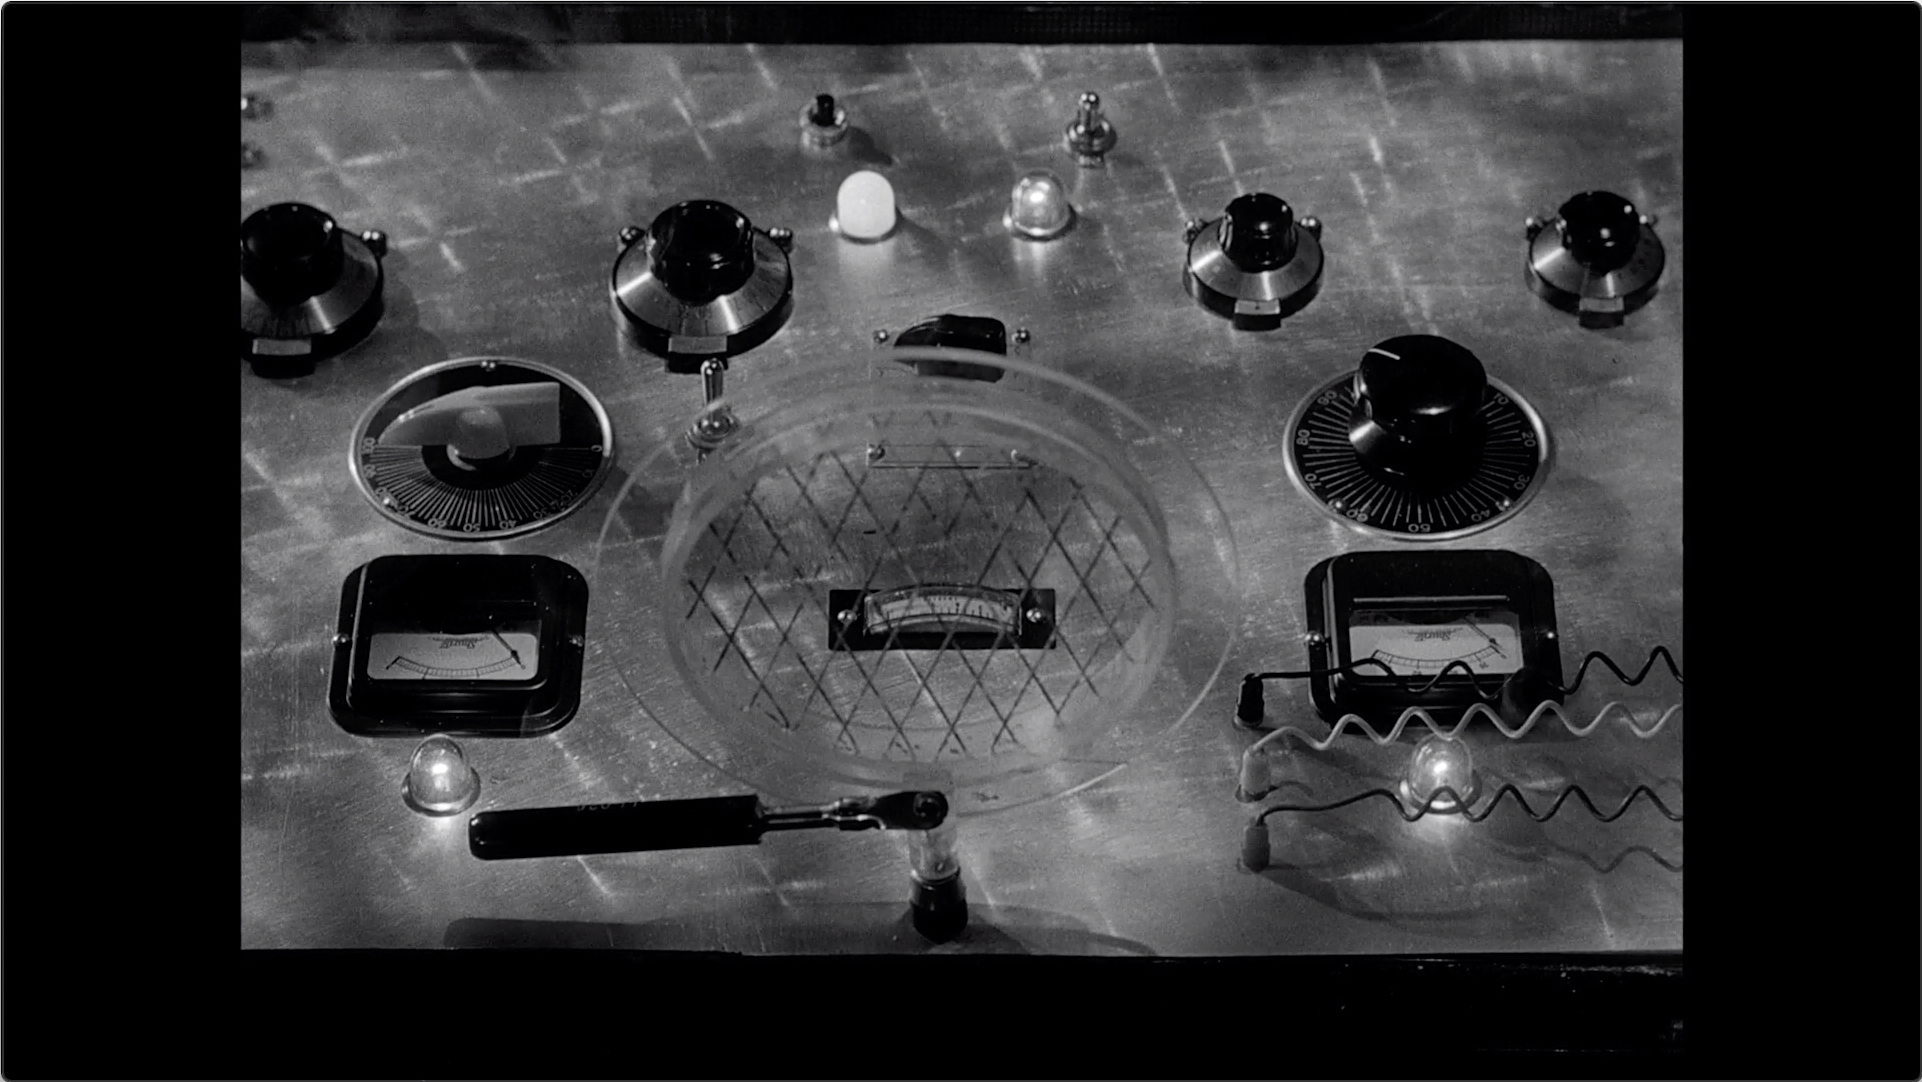 the-outer-limits-s01e16-controlled-experiment-jan-13-1964-93-jpg.187035